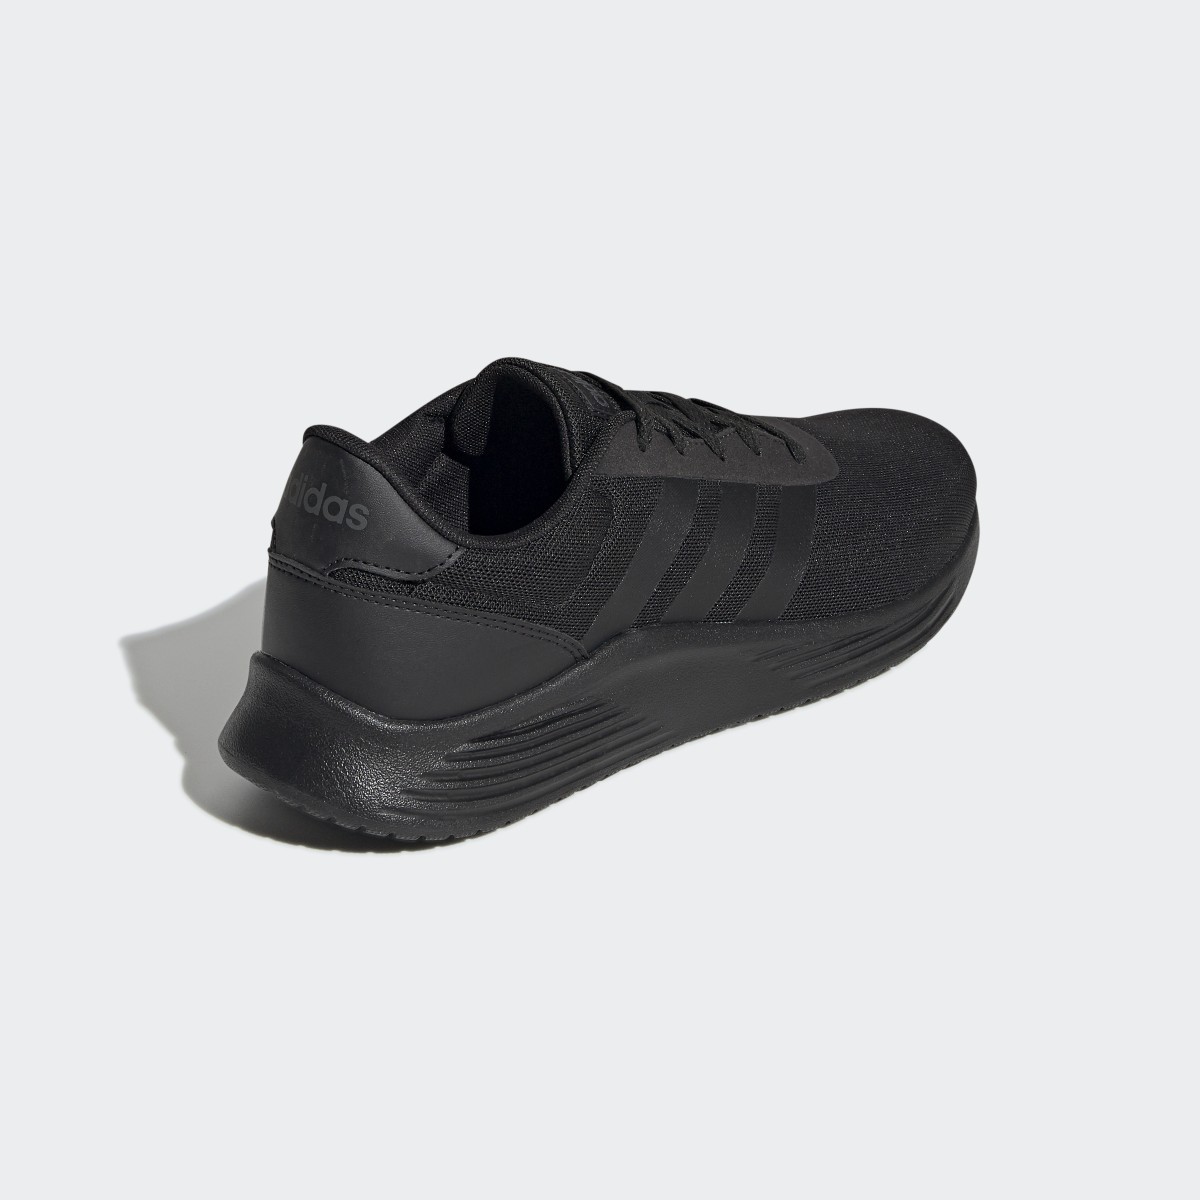 Adidas Lite Racer 2.0 Shoes. 6